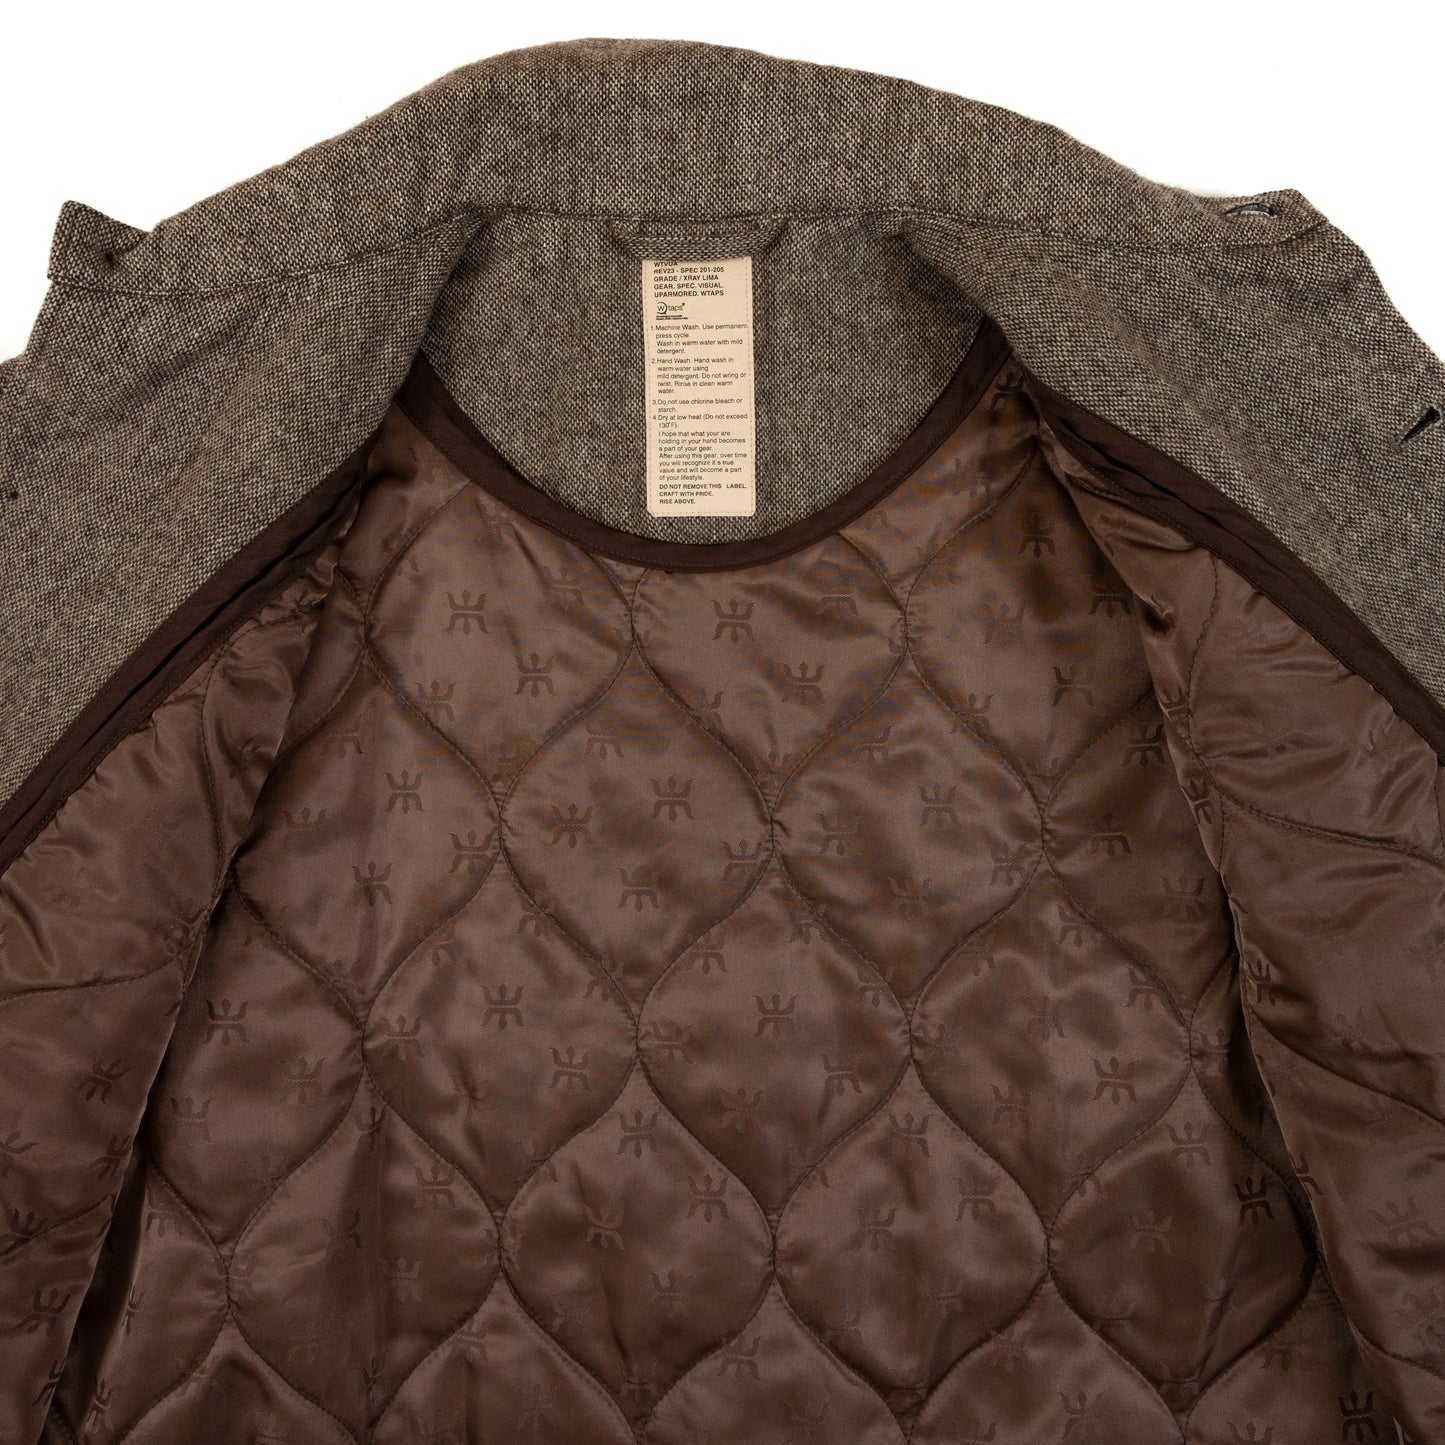 Wtaps Quilted Shirt Jacket